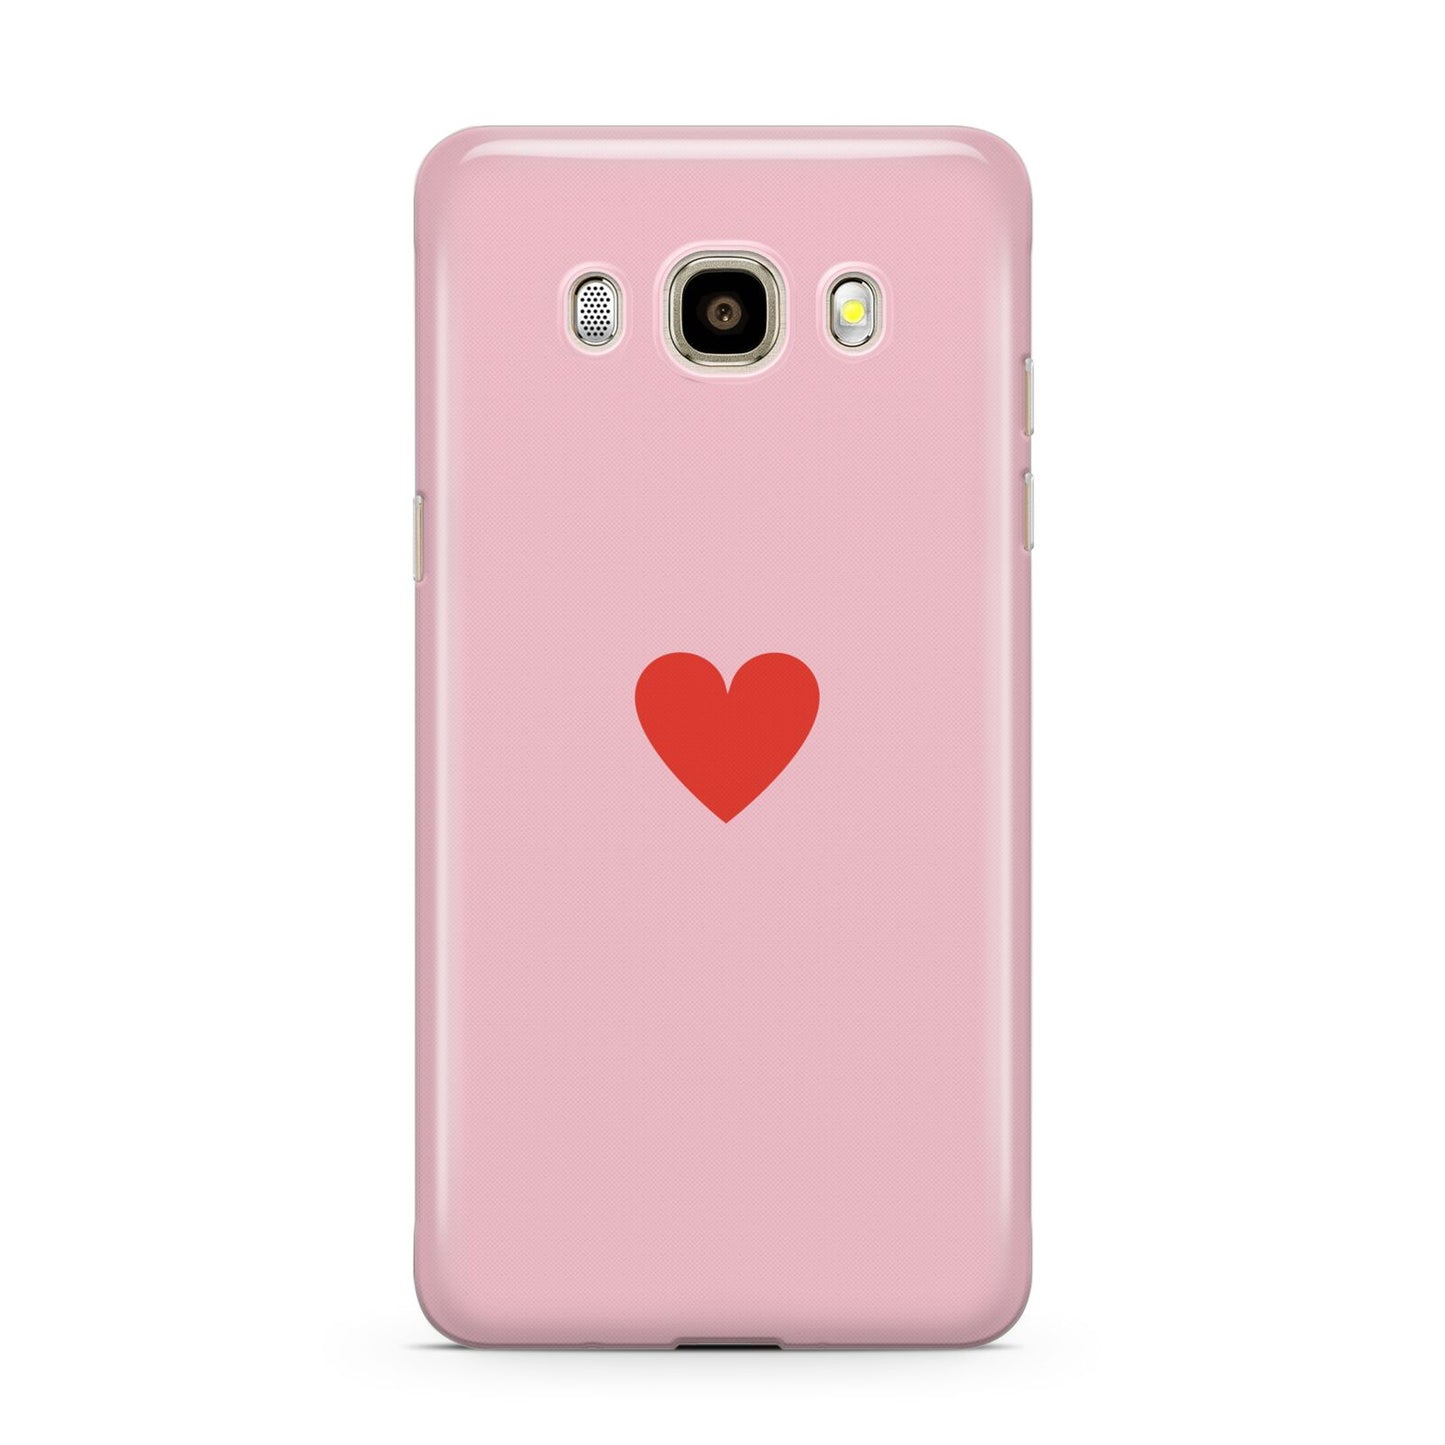 Red Heart Samsung Galaxy J7 2016 Case on gold phone